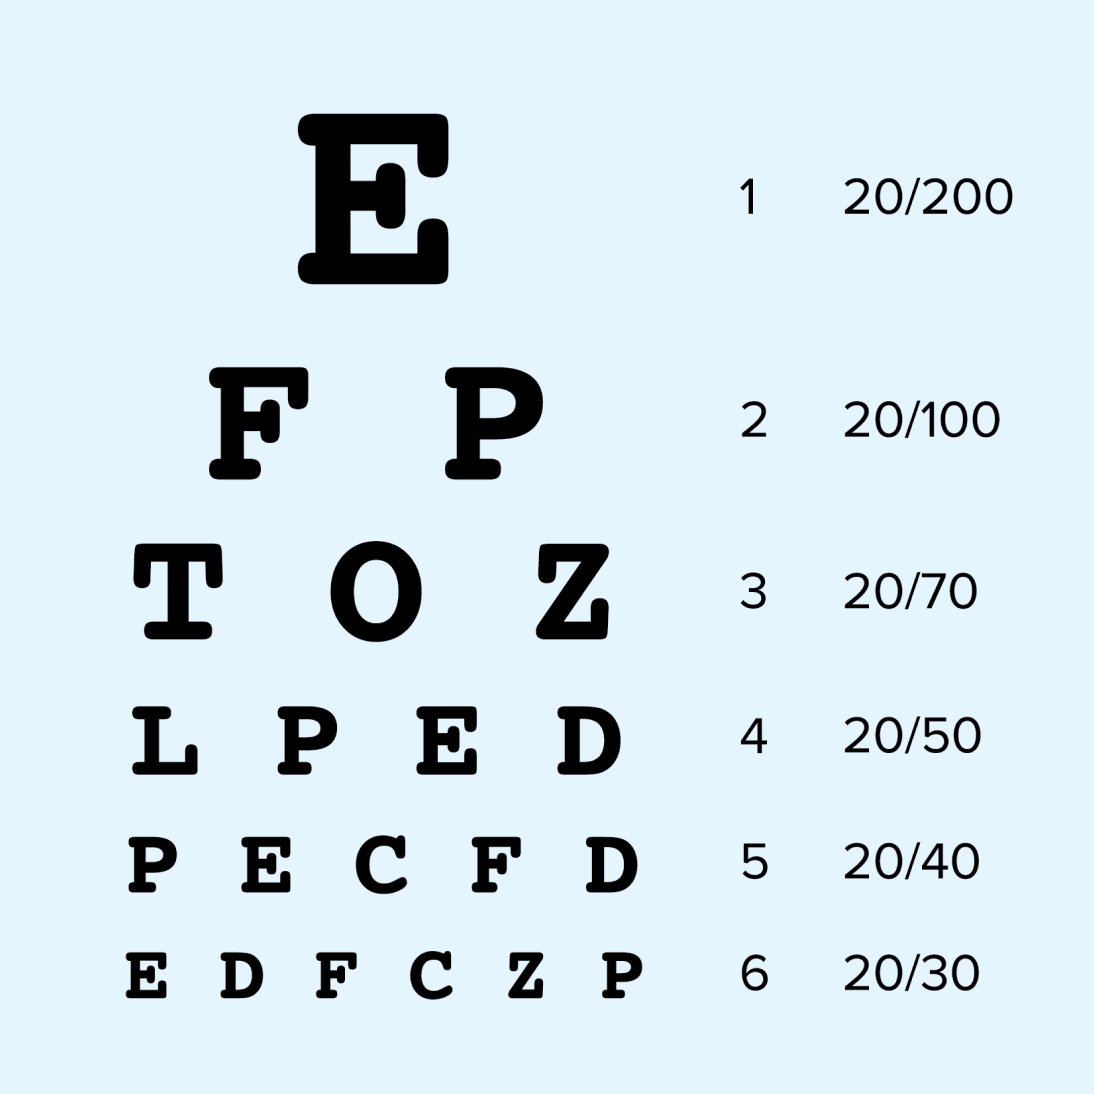 a-person-with-20-40-visual-acuity-capa-learning